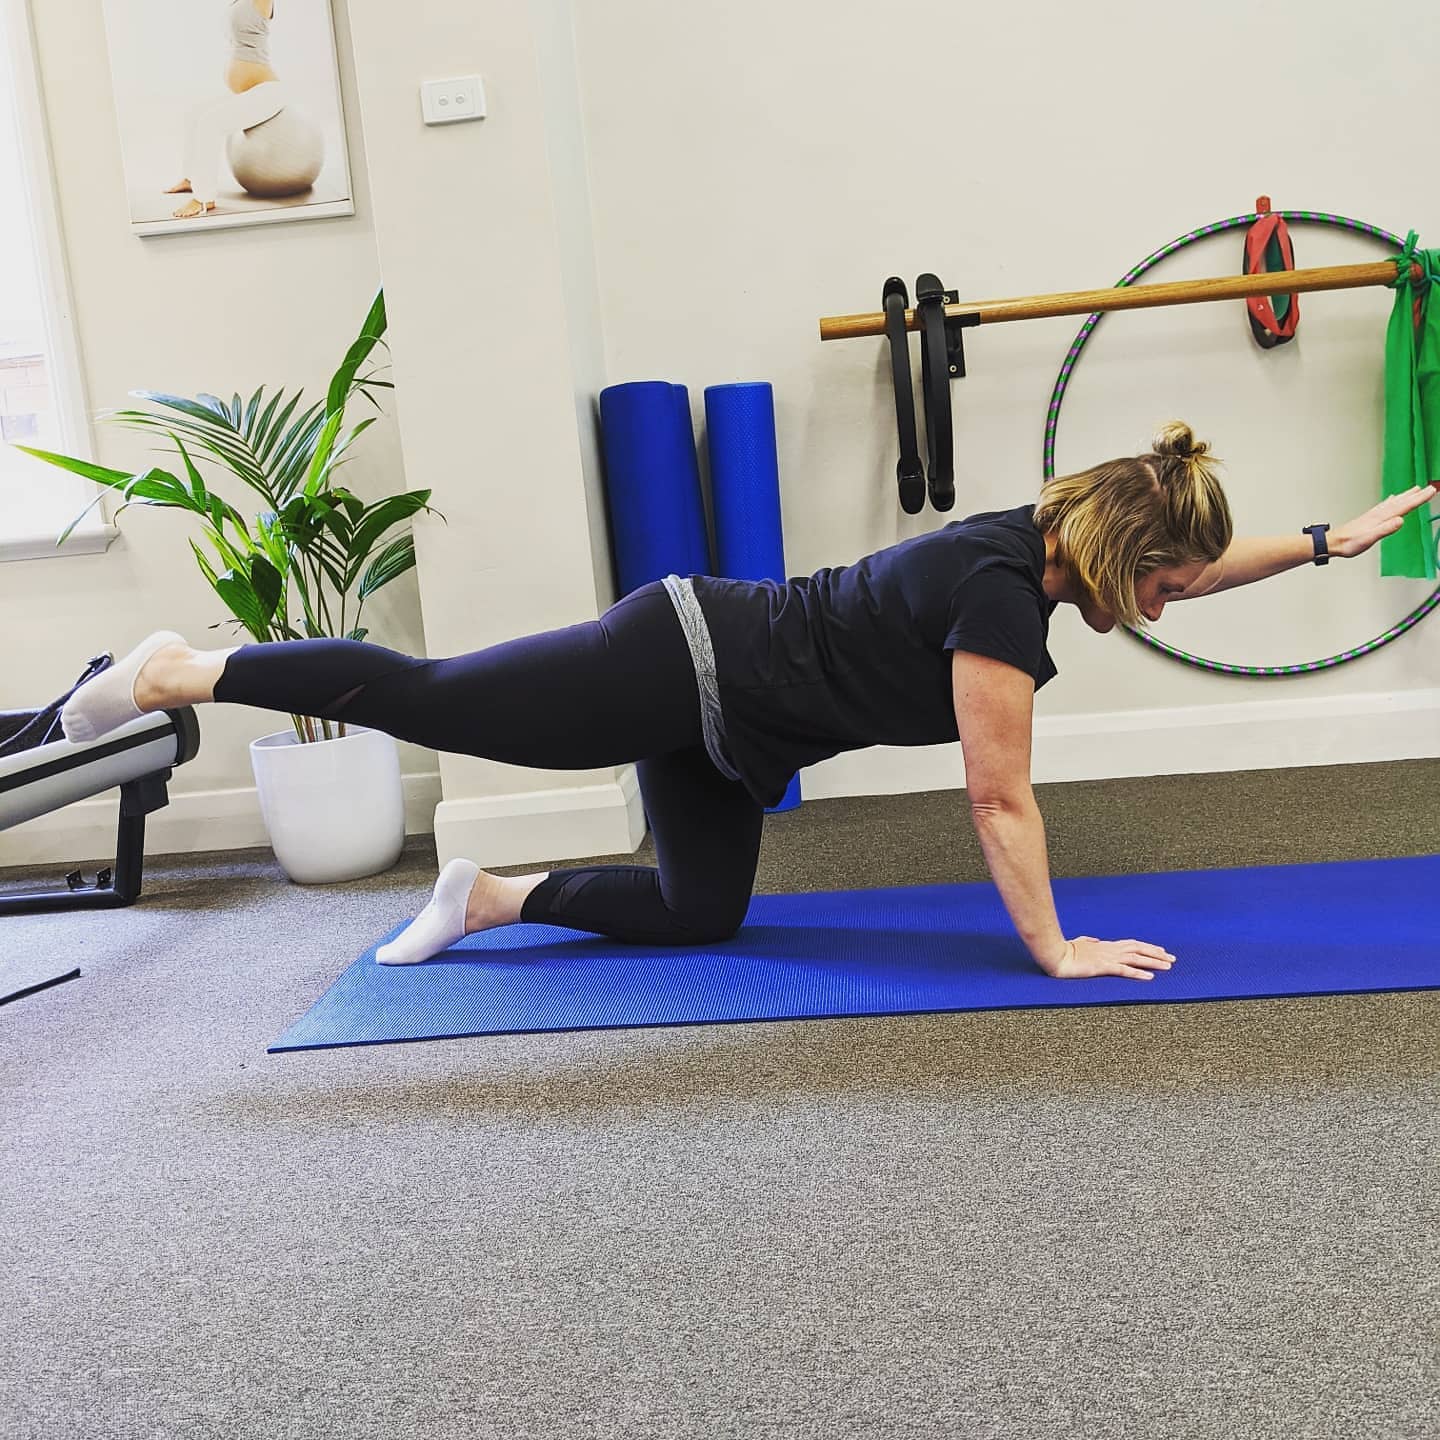 TUES 11AM FREE LOCKDOWN MUMS & BUBS PILATES SESSION ON FACEBOOK LIVE!Don't let this lockdown delay your post natal recovery! Join our Physio Caitlin online tomorrow at 11am for another 20-30 minute post-natal strengthening session.Go to our Facebook page for more details.